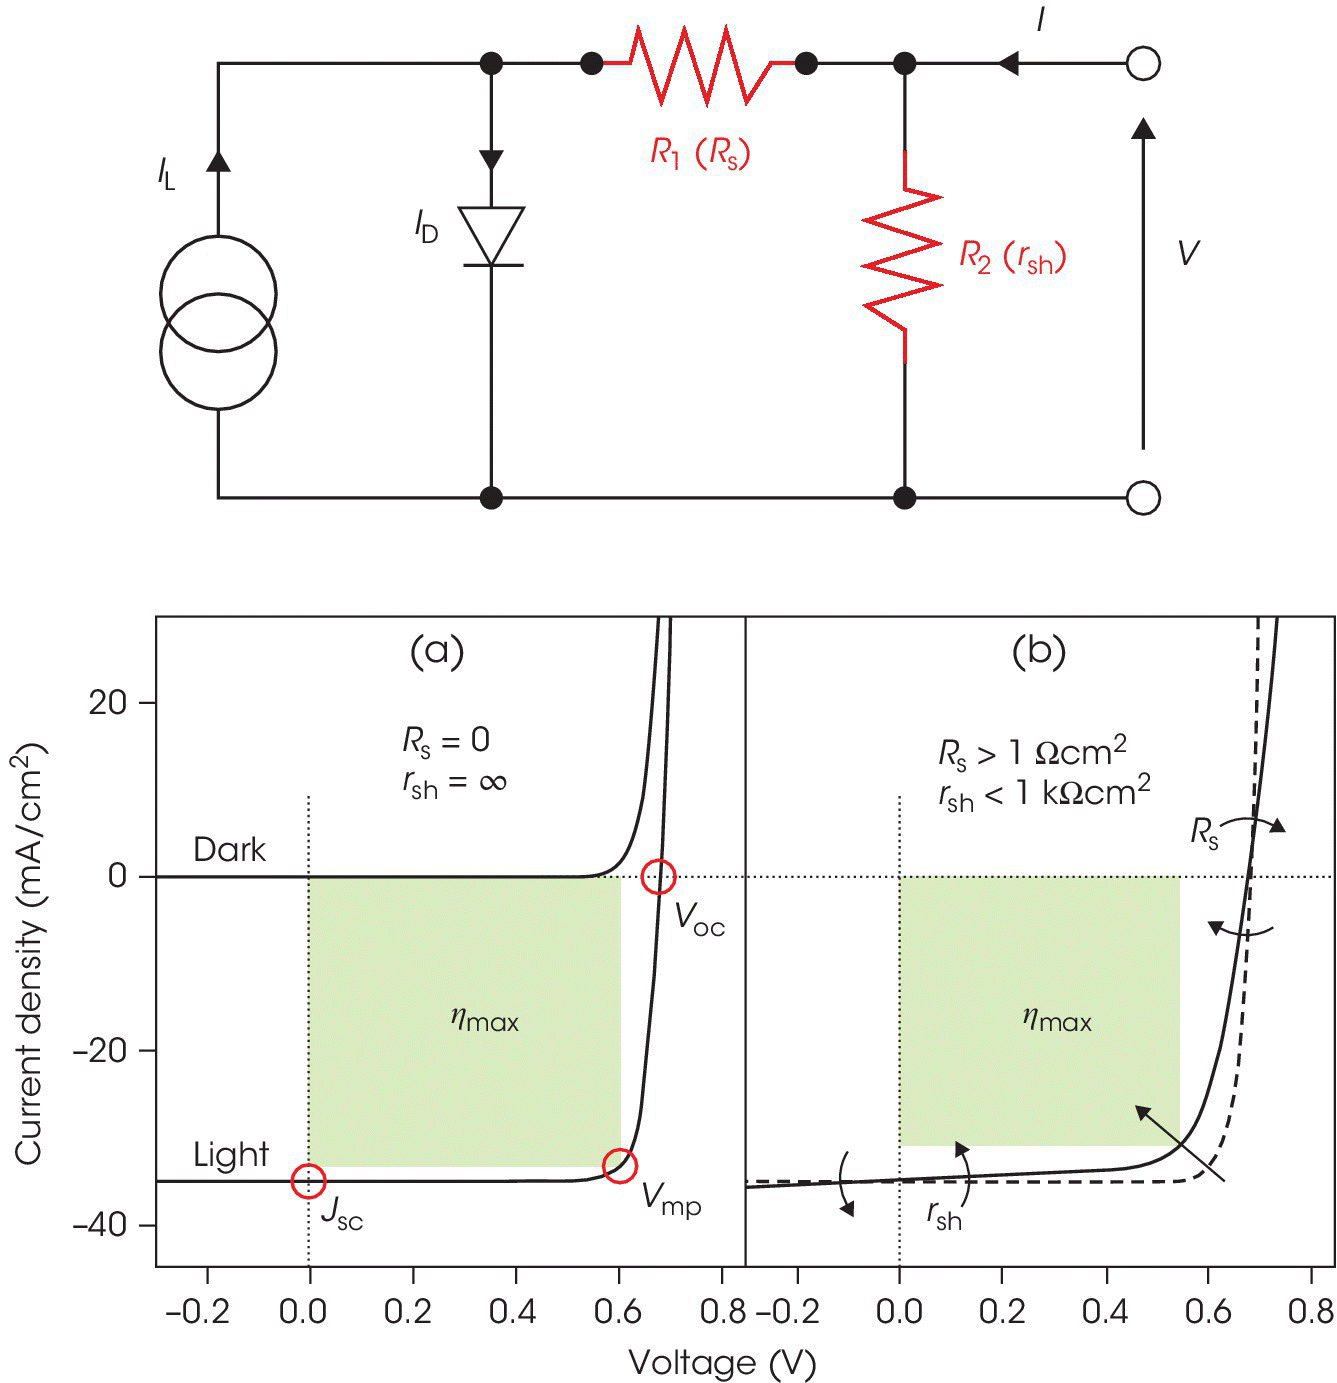 Circuit diagram illustrating an ideal solar cell with 2 resistors R1 (Rs) and R2 (rsh), 1 diode ID, and 2 currents I and IL (top) and graph of voltage vs. current density displaying ascending curves (bottom).